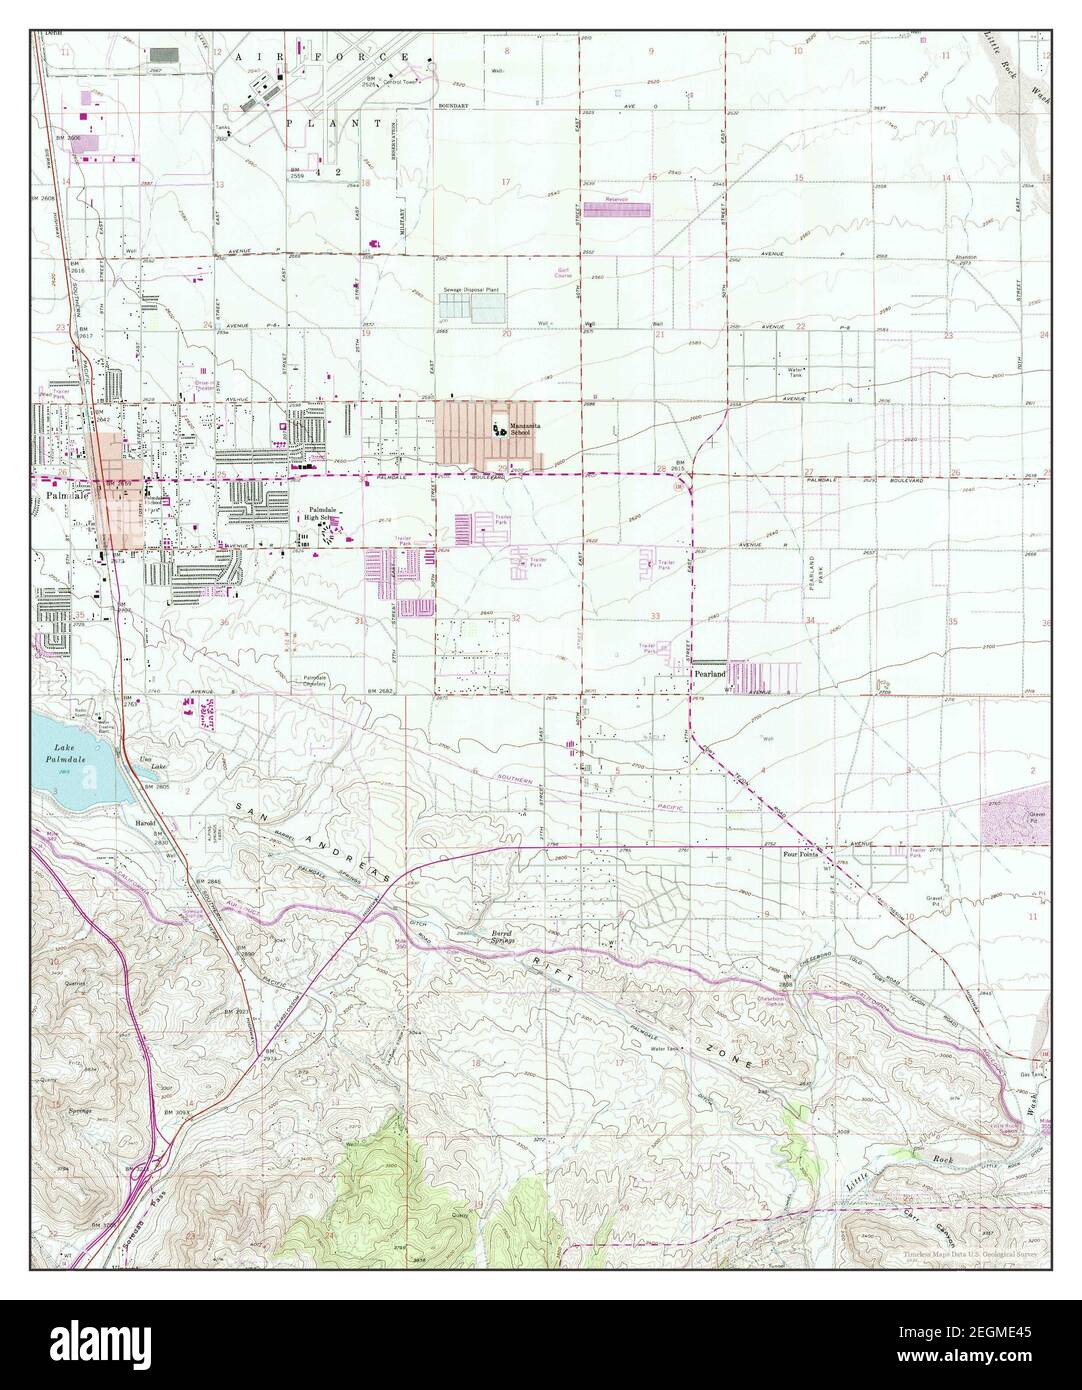 Palmdale, California, map 1958, 1:24000, United States of America by Timeless Maps, data U.S. Geological Survey Stock Photo